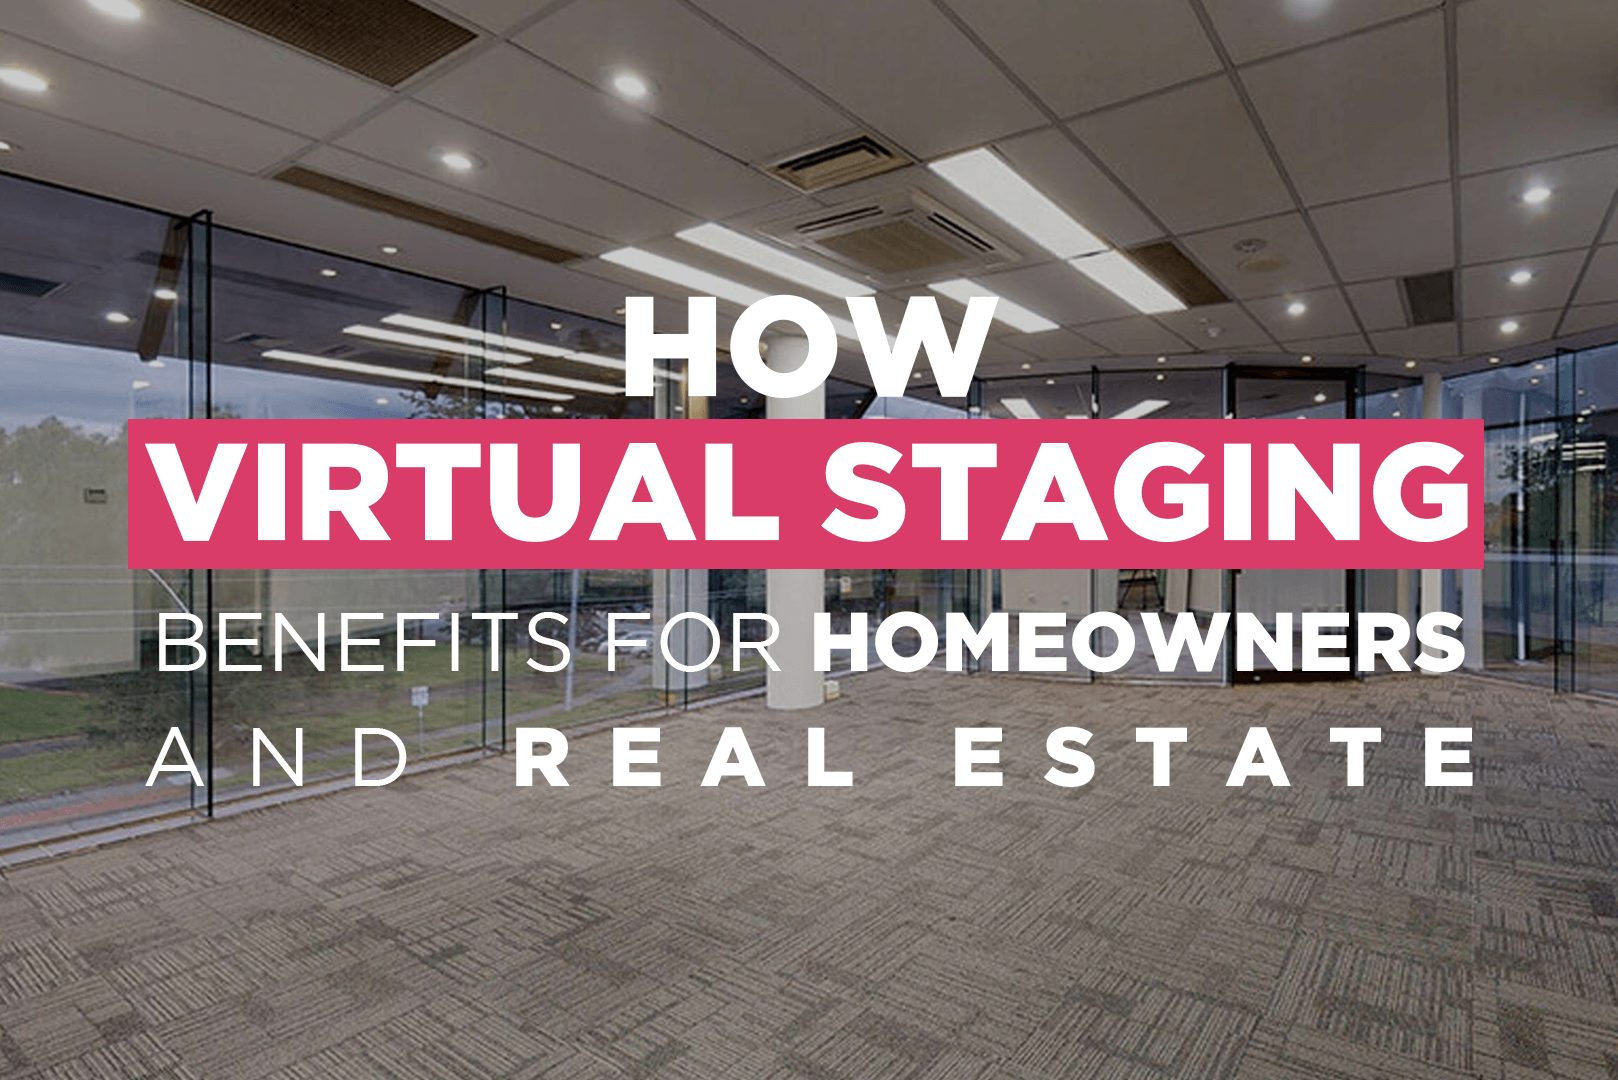 How Virtual Staging Benefits For Homeowners And Real Estate